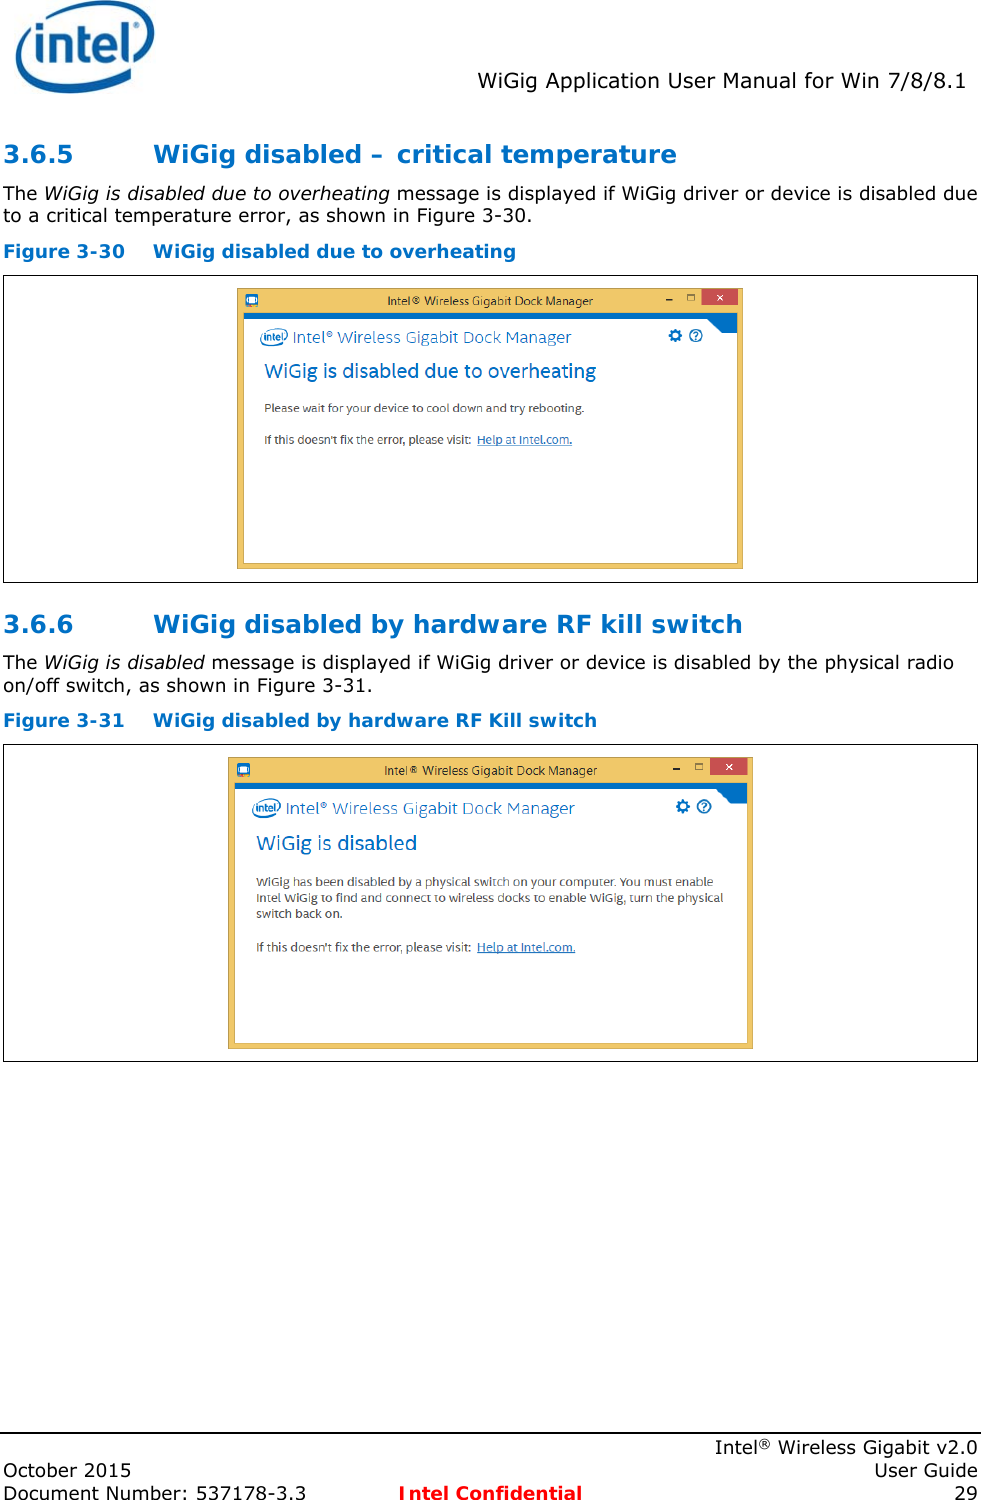  WiGig Application User Manual for Win 7/8/8.1    Intel® Wireless Gigabit v2.0 October 2015    User Guide Document Number: 537178-3.3  Intel Confidential 29 3.6.5 WiGig disabled – critical temperature The WiGig is disabled due to overheating message is displayed if WiGig driver or device is disabled due to a critical temperature error, as shown in Figure 3-30. Figure 3-30 WiGig disabled due to overheating  3.6.6 WiGig disabled by hardware RF kill switch The WiGig is disabled message is displayed if WiGig driver or device is disabled by the physical radio on/off switch, as shown in Figure 3-31. Figure 3-31  WiGig disabled by hardware RF Kill switch  